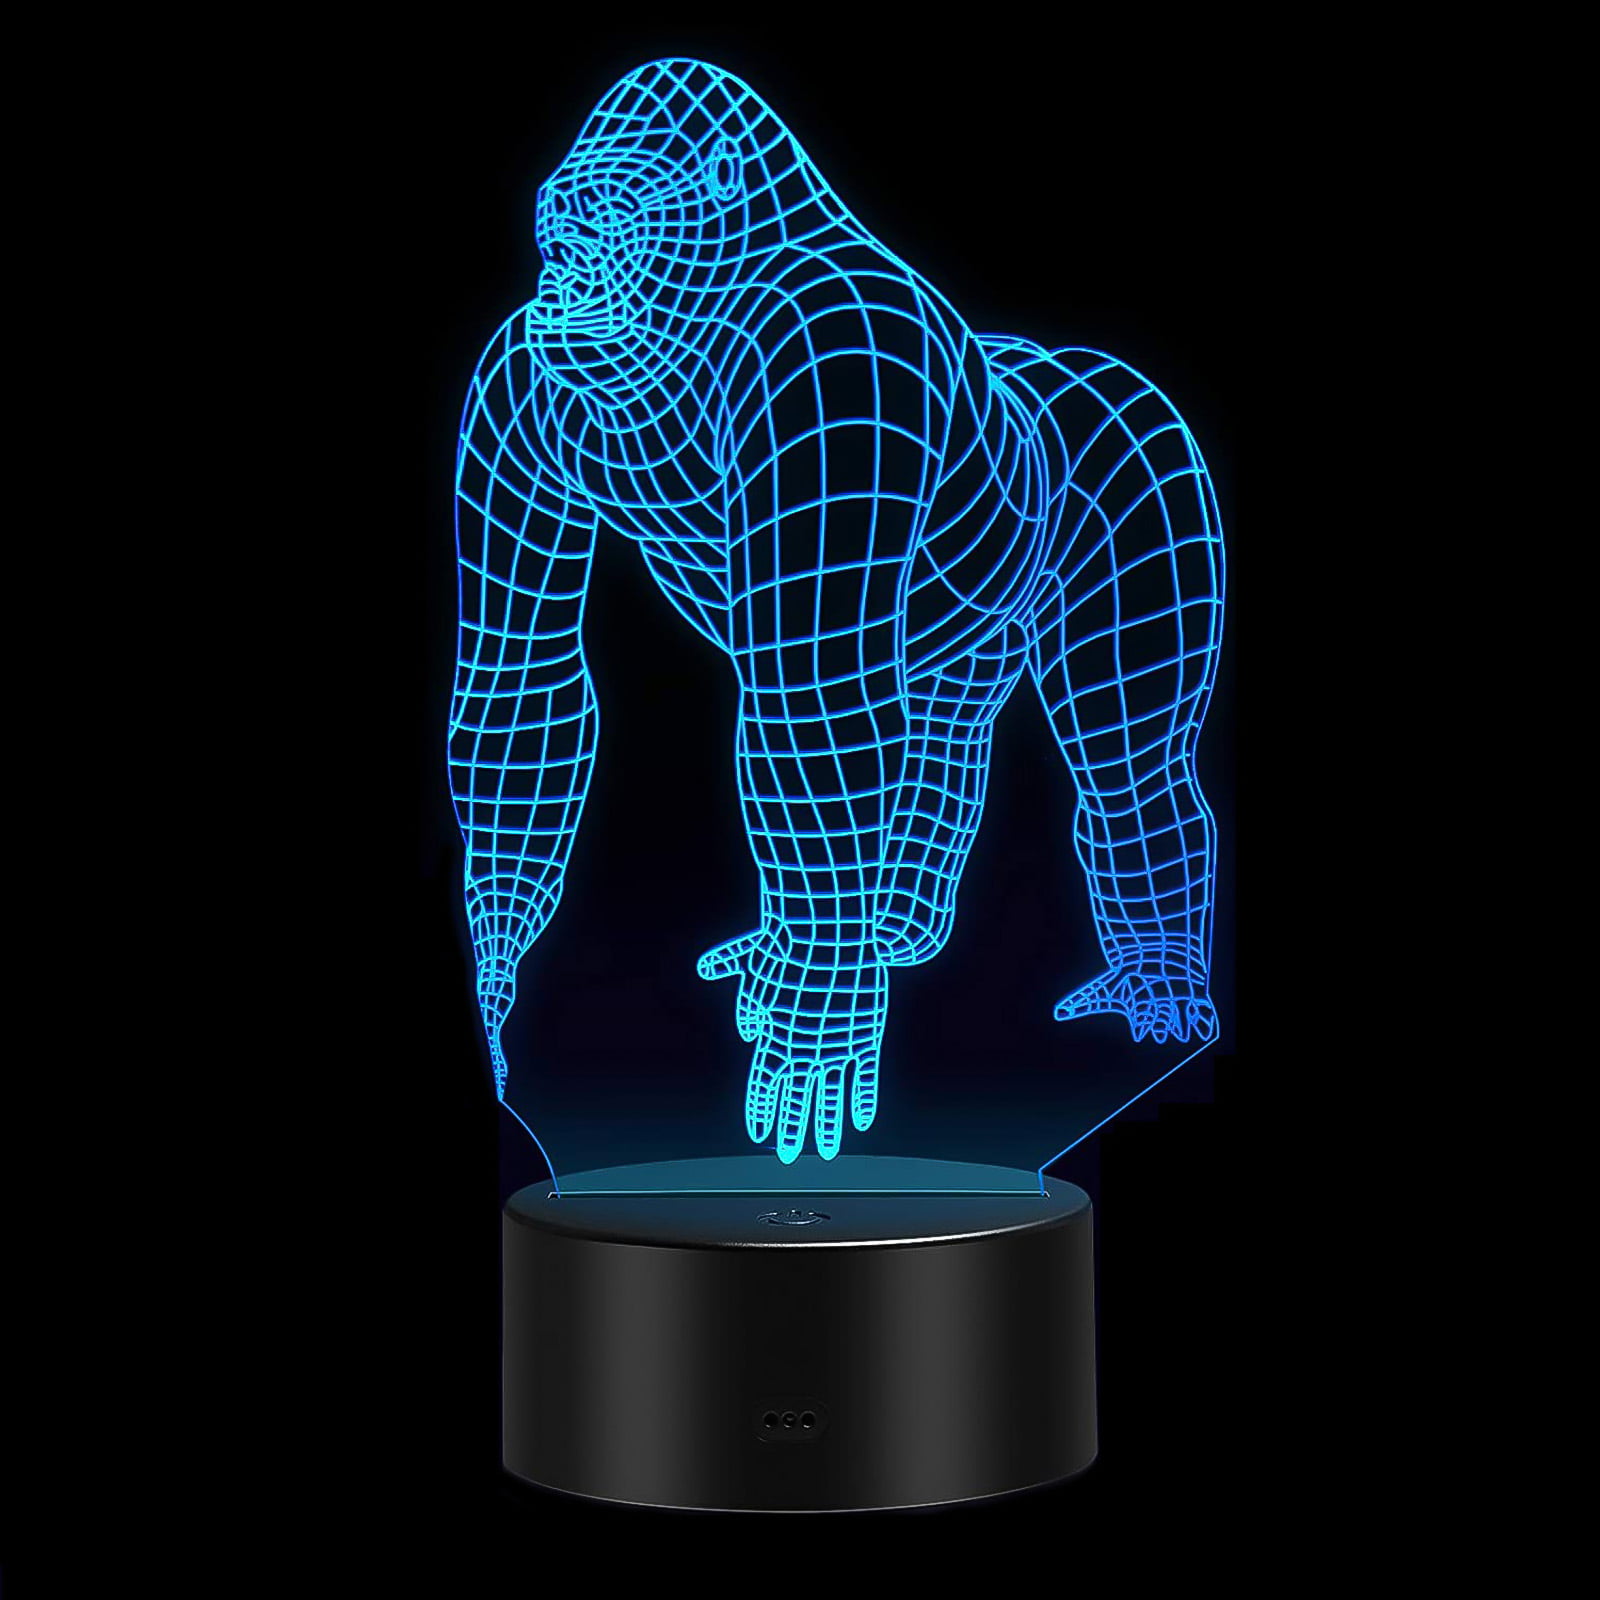 HLLKYYLF Baby Gorilla Gifts Gorilla Light 16 Color Changing Kids Lamp with Touch and Remote Control Gorilla Toys Light as Gift Idea for Home Decor or Birthday Gifts for Baby 